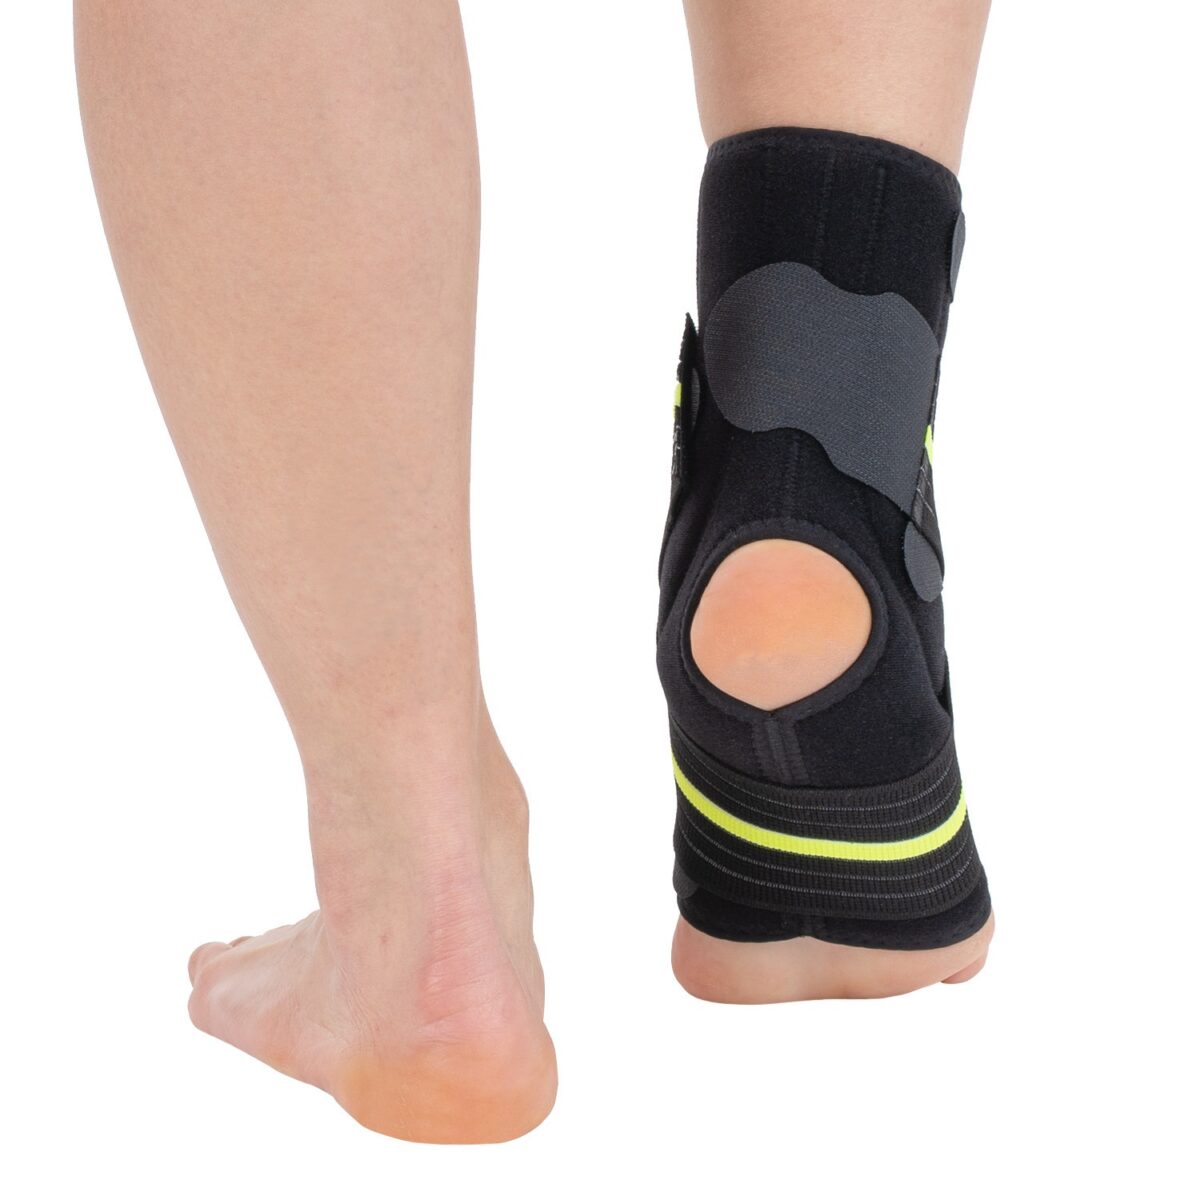 wingmed orthopedic equipments W606 ligament ankle support with 8 strap 64 1